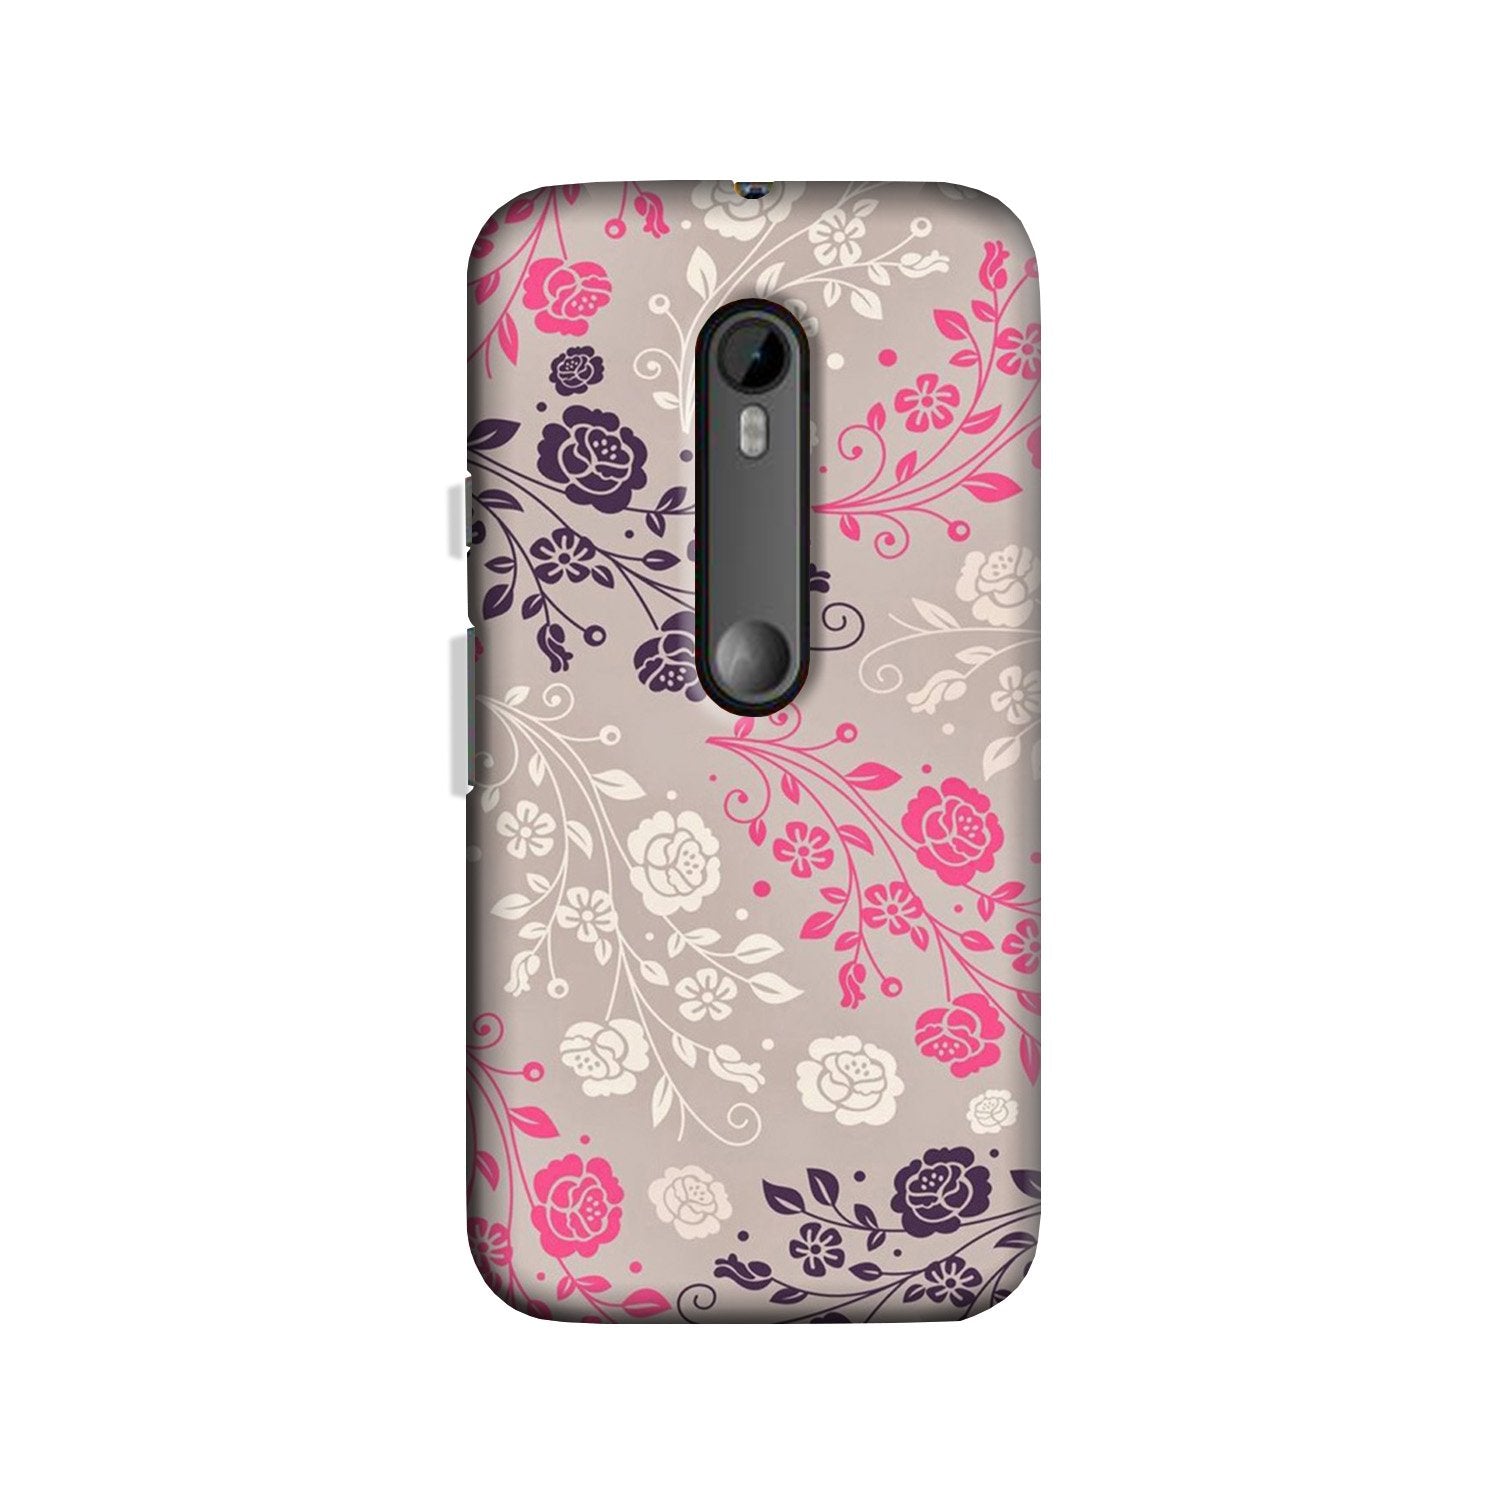 Pattern2 Case for Moto X Play